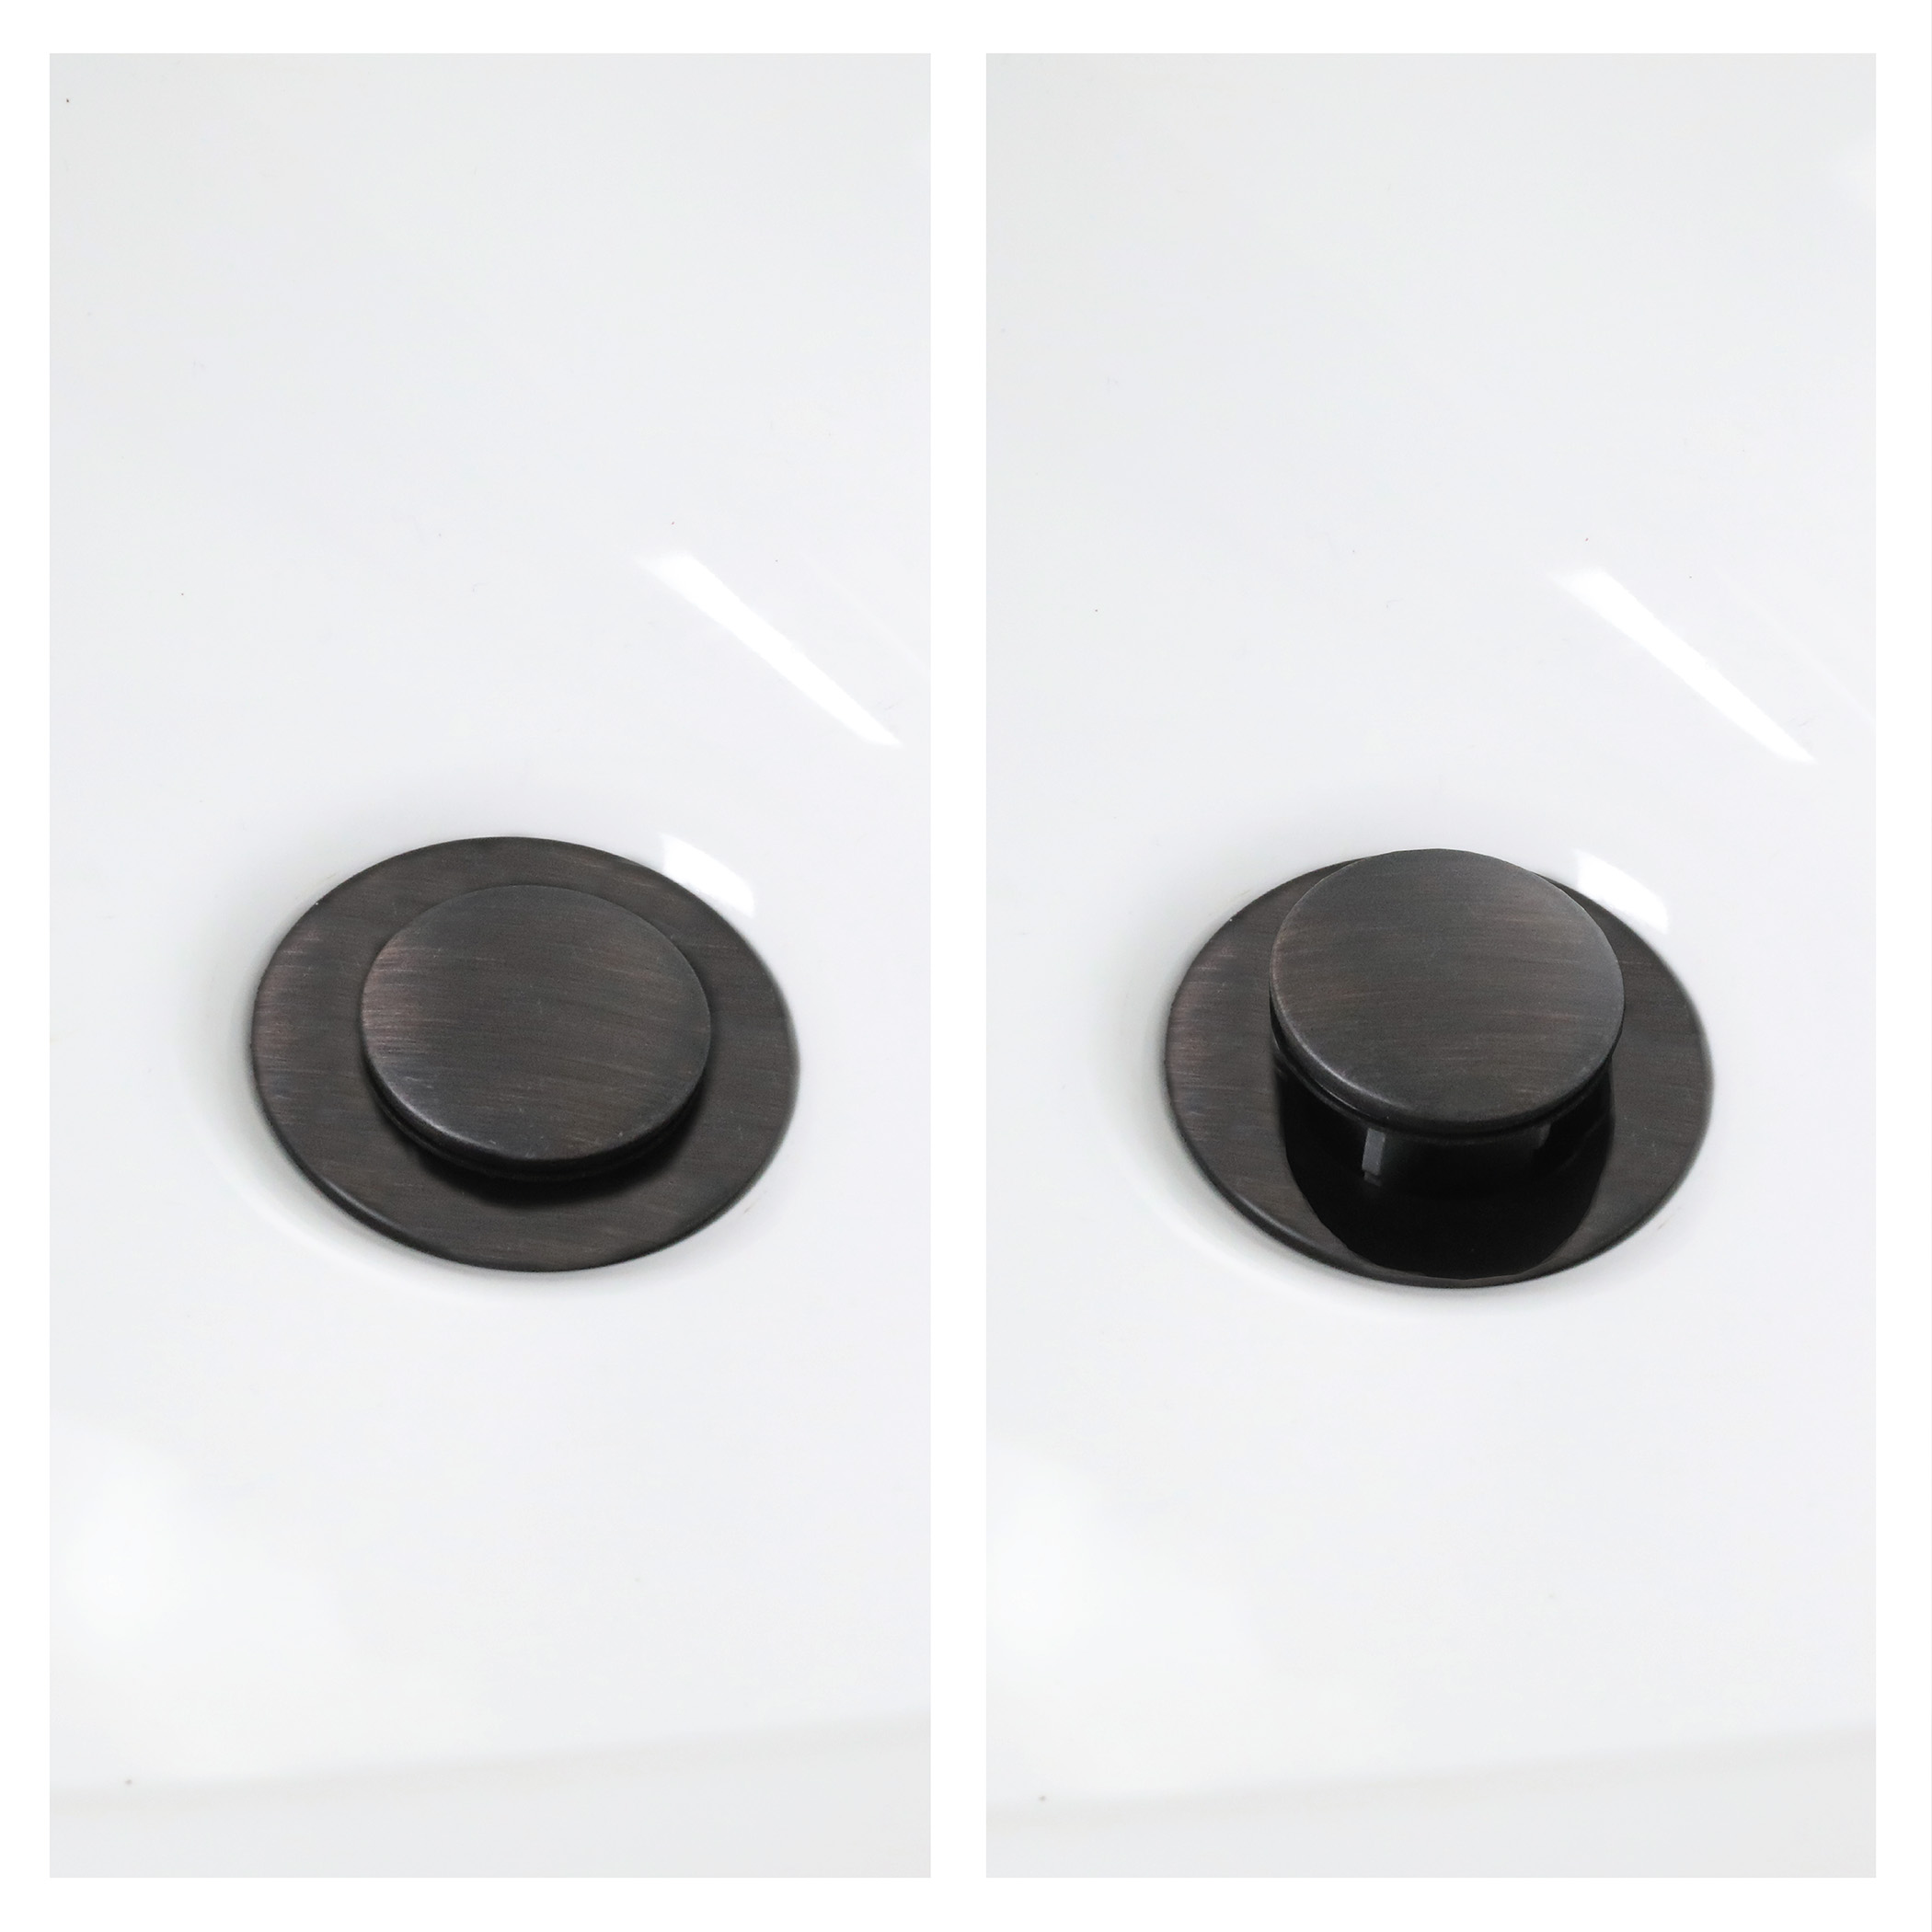 Bathroom Pop-up Stopper Replacement for Pop-up Drain Assemblies in Oil Rubbed Bronze